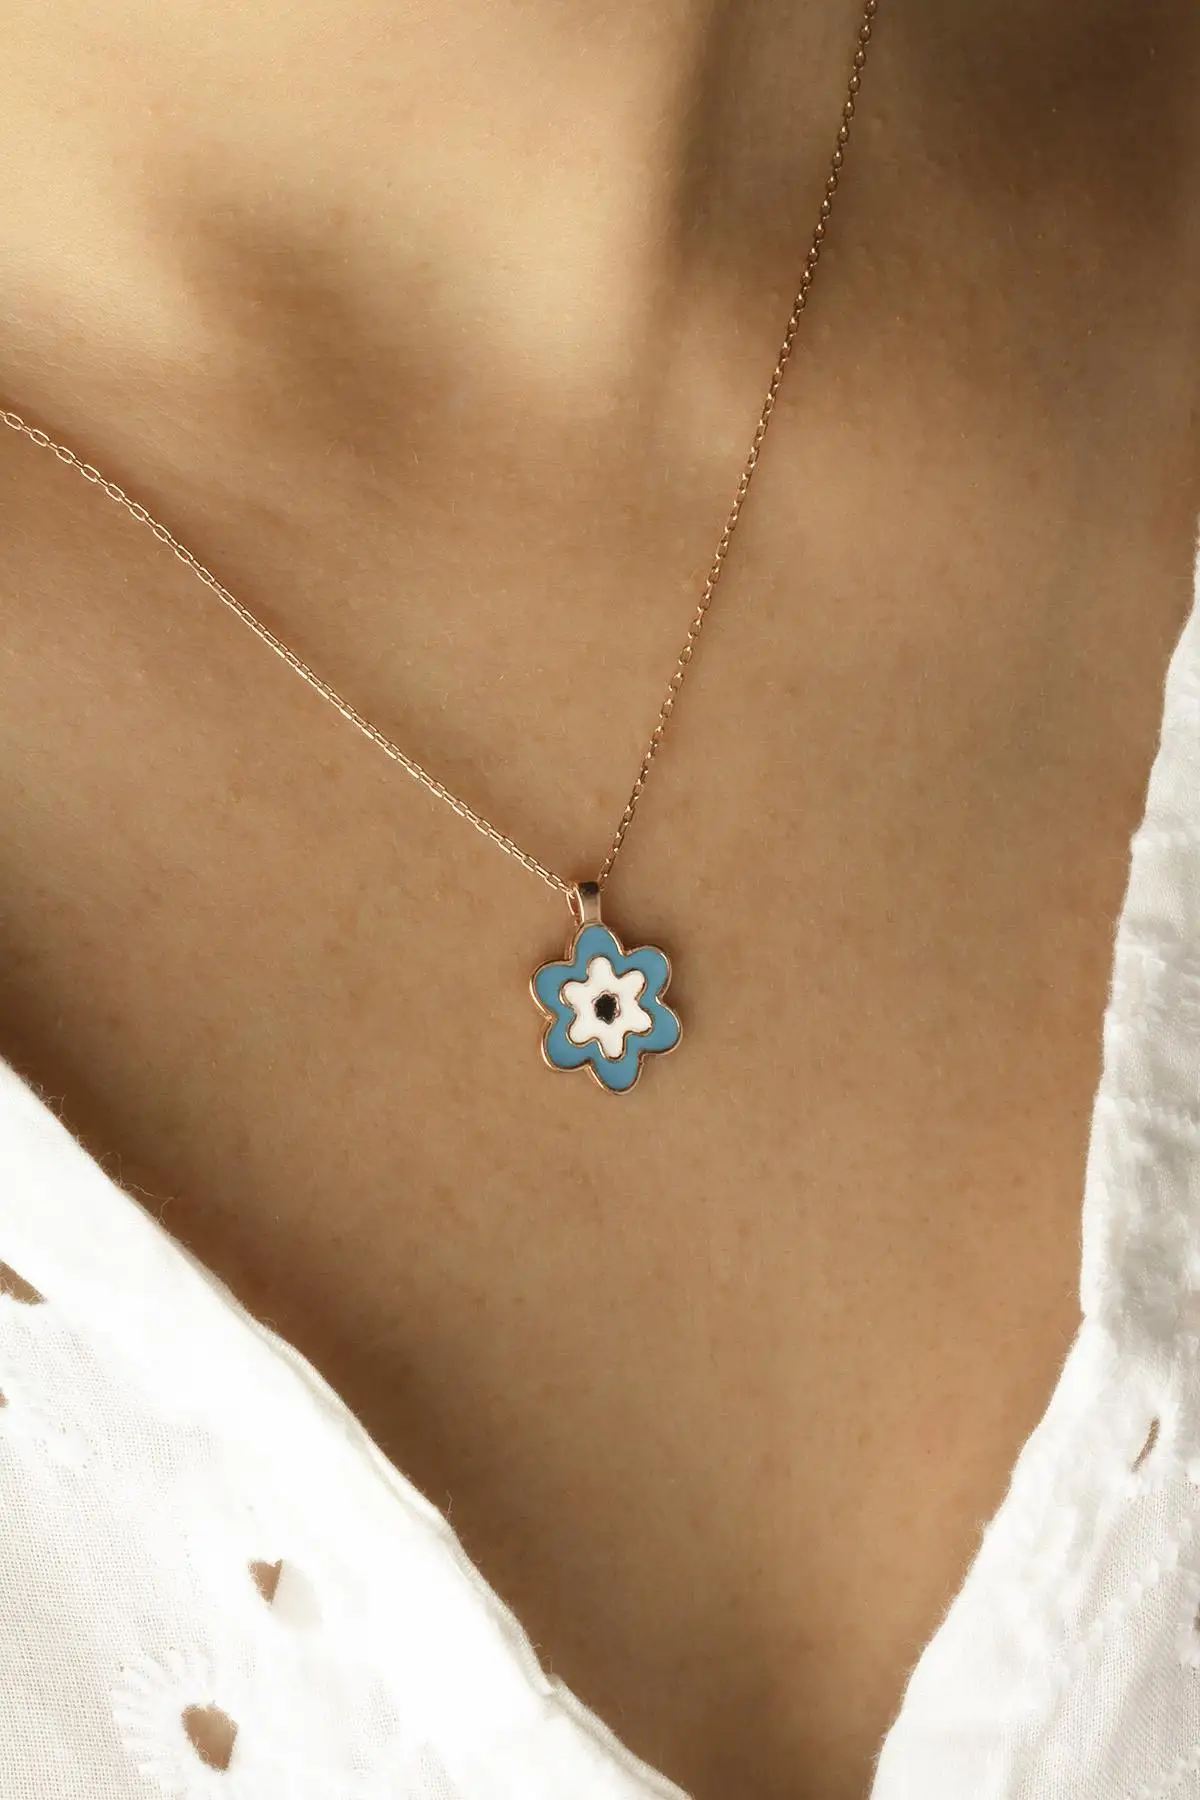 

New Mini Sweet Daisy Turquoise Flower 925 Sterling Silver Pendant Necklace Enamel Pendant Necklace for Women Jewelry Gift Trendy